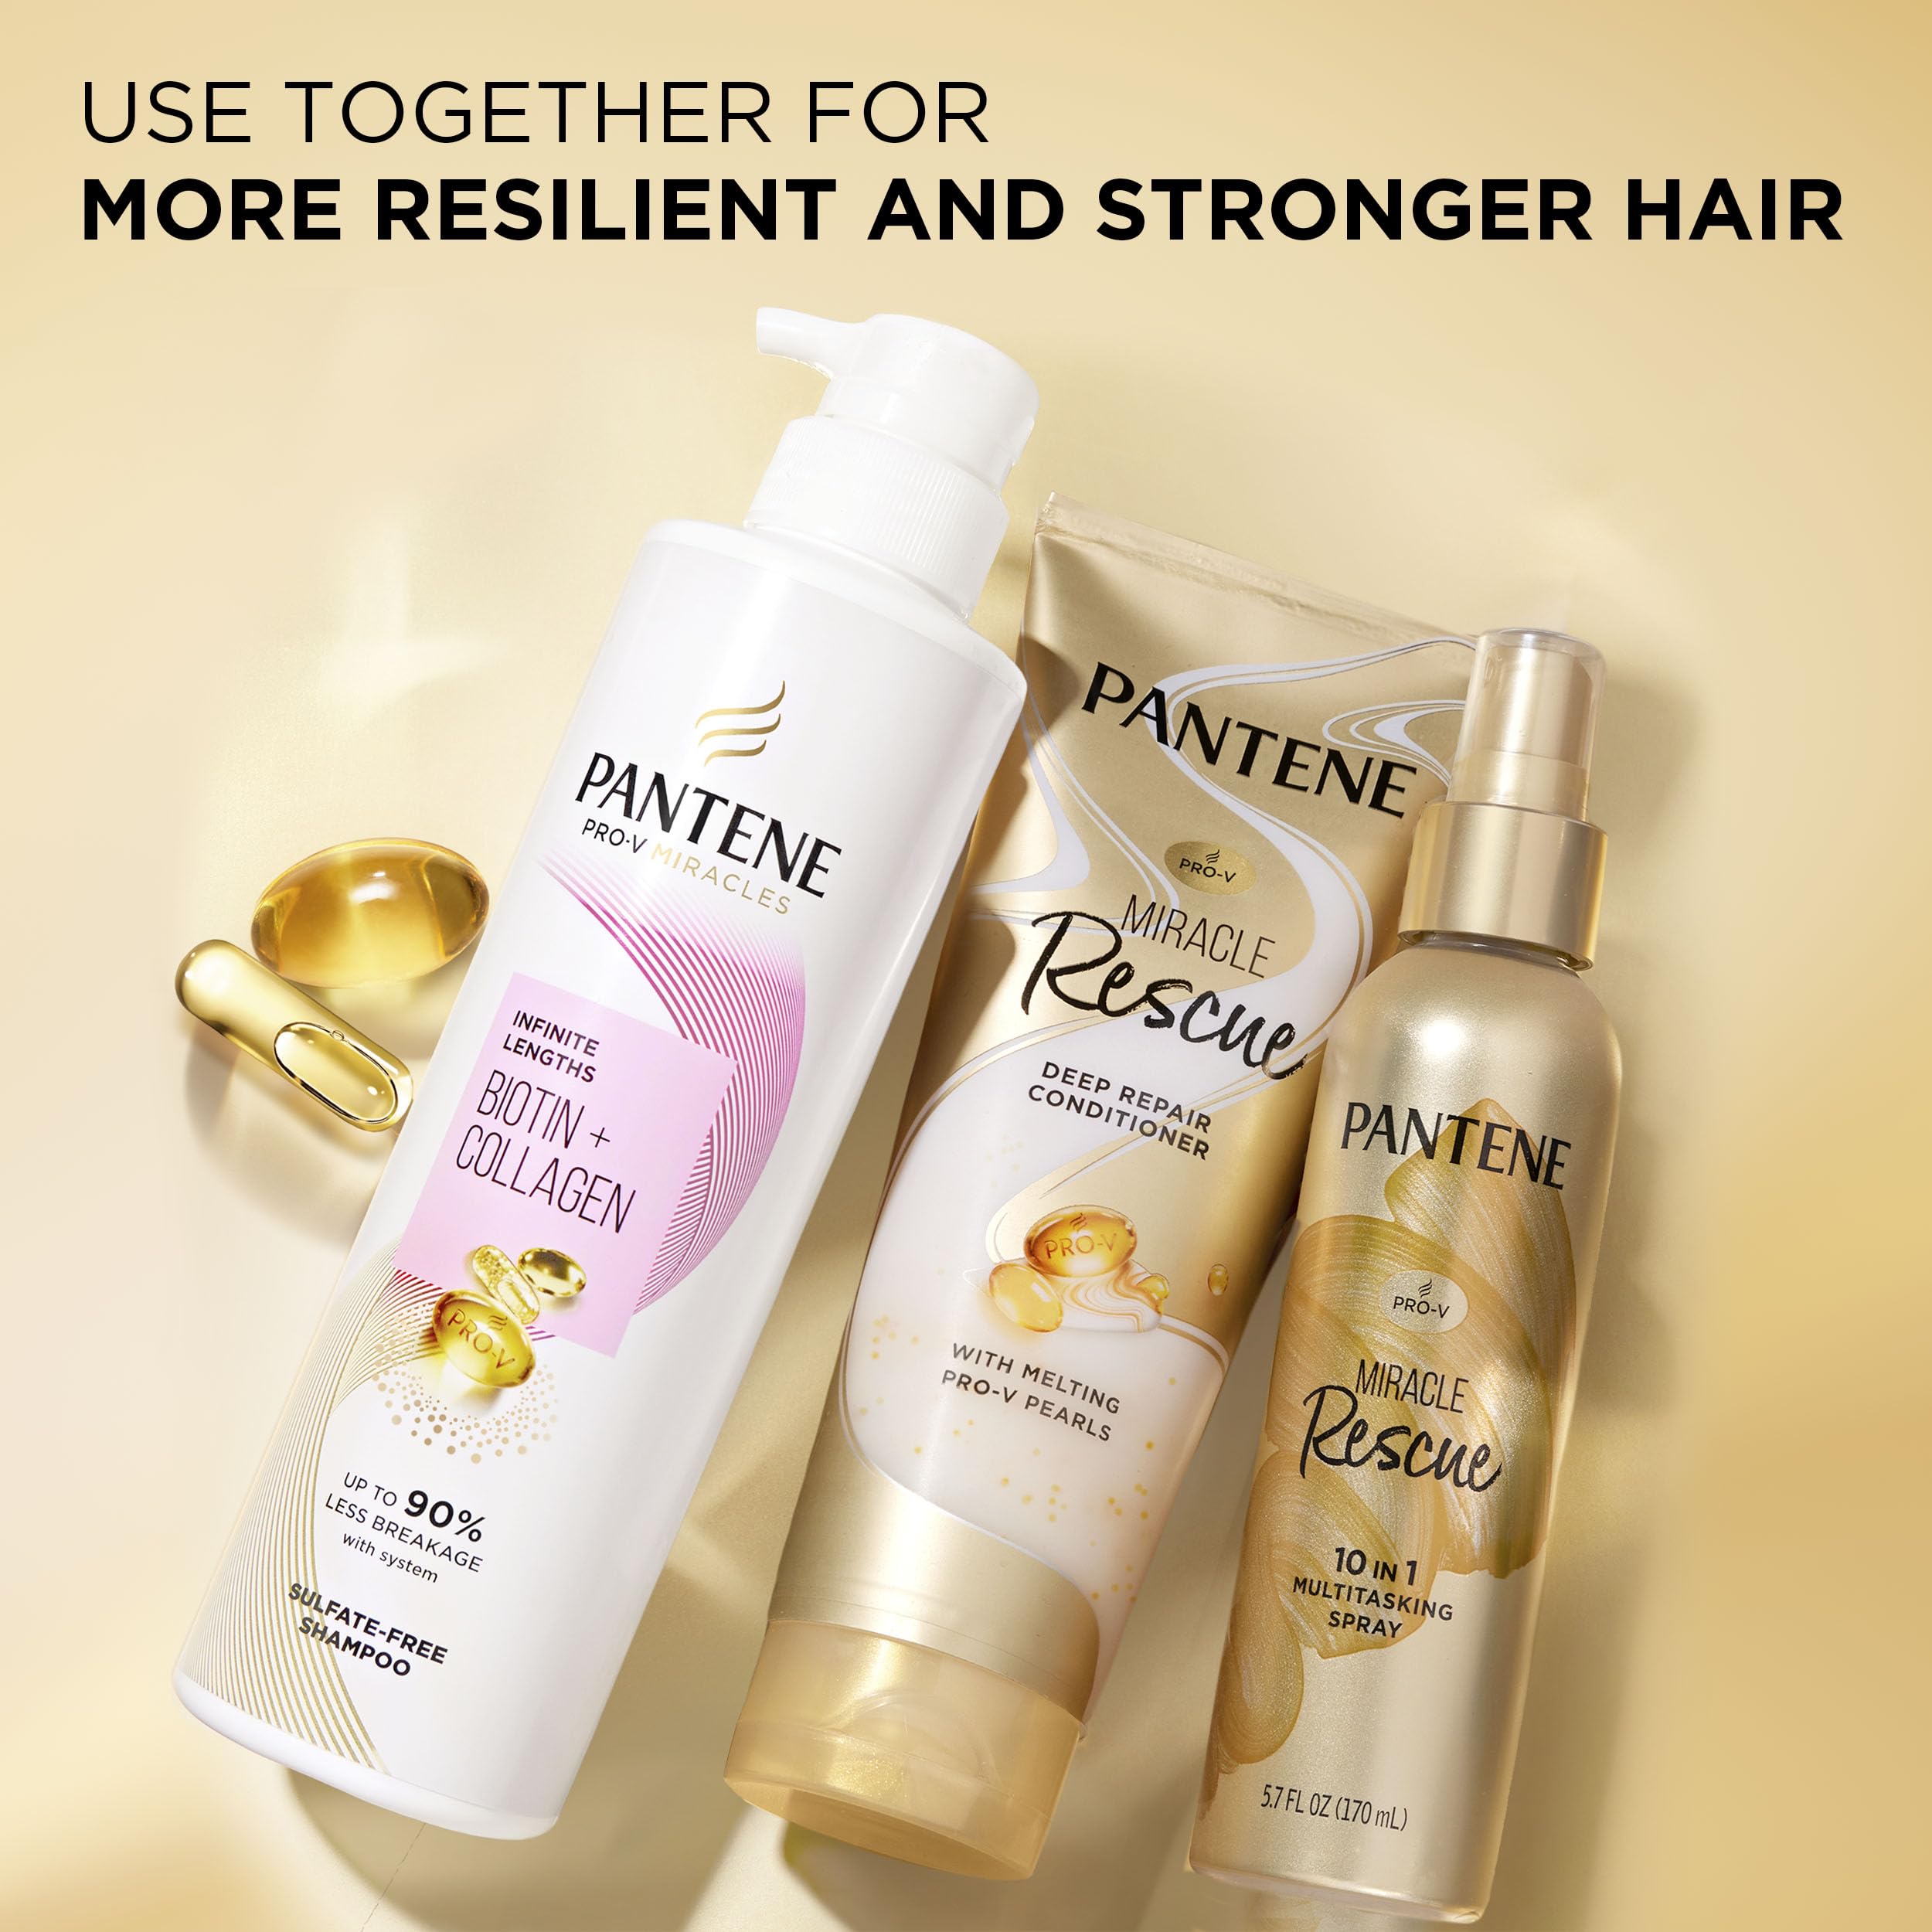 Pantene Miracle Rescue Deep Conditioner for Dry Damaged Hair with Melting Pro-V Pearls, Hair Treatment Transforms, Softens, and Repairs Hair, For All Hair Types, Safe for Color Treated Hair, 8.0 oz